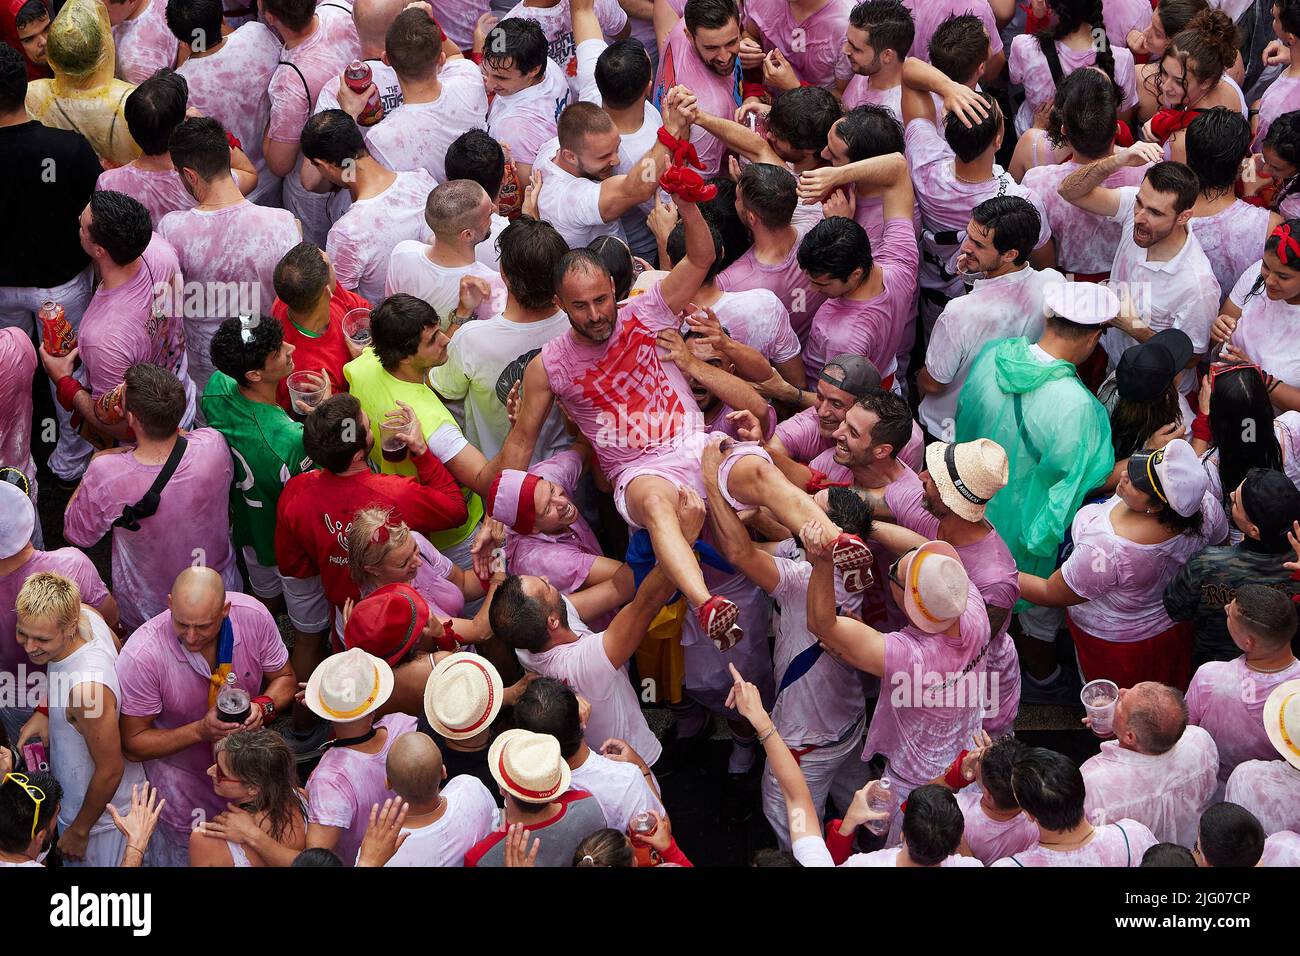 Pamplona, Spain. 06th July, 2022. Revellers enjoy the atmosphere during the opening day or 'Chupinazo' of the San Fermin Running of the Bulls fiesta on July 06, 2022 in Pamplona, Spain. The annual Fiesta de San Fermin, made famous by the 1926 novel of US writer Ernest Hemmingway entitled 'The Sun Also Rises', involves the daily running of the bulls through the historic heart of Pamplona to the bull ring. (Photo by Ruben Albarran / PRESSINPHOTO) Credit: PRESSINPHOTO SPORTS AGENCY/Alamy Live News Stock Photo